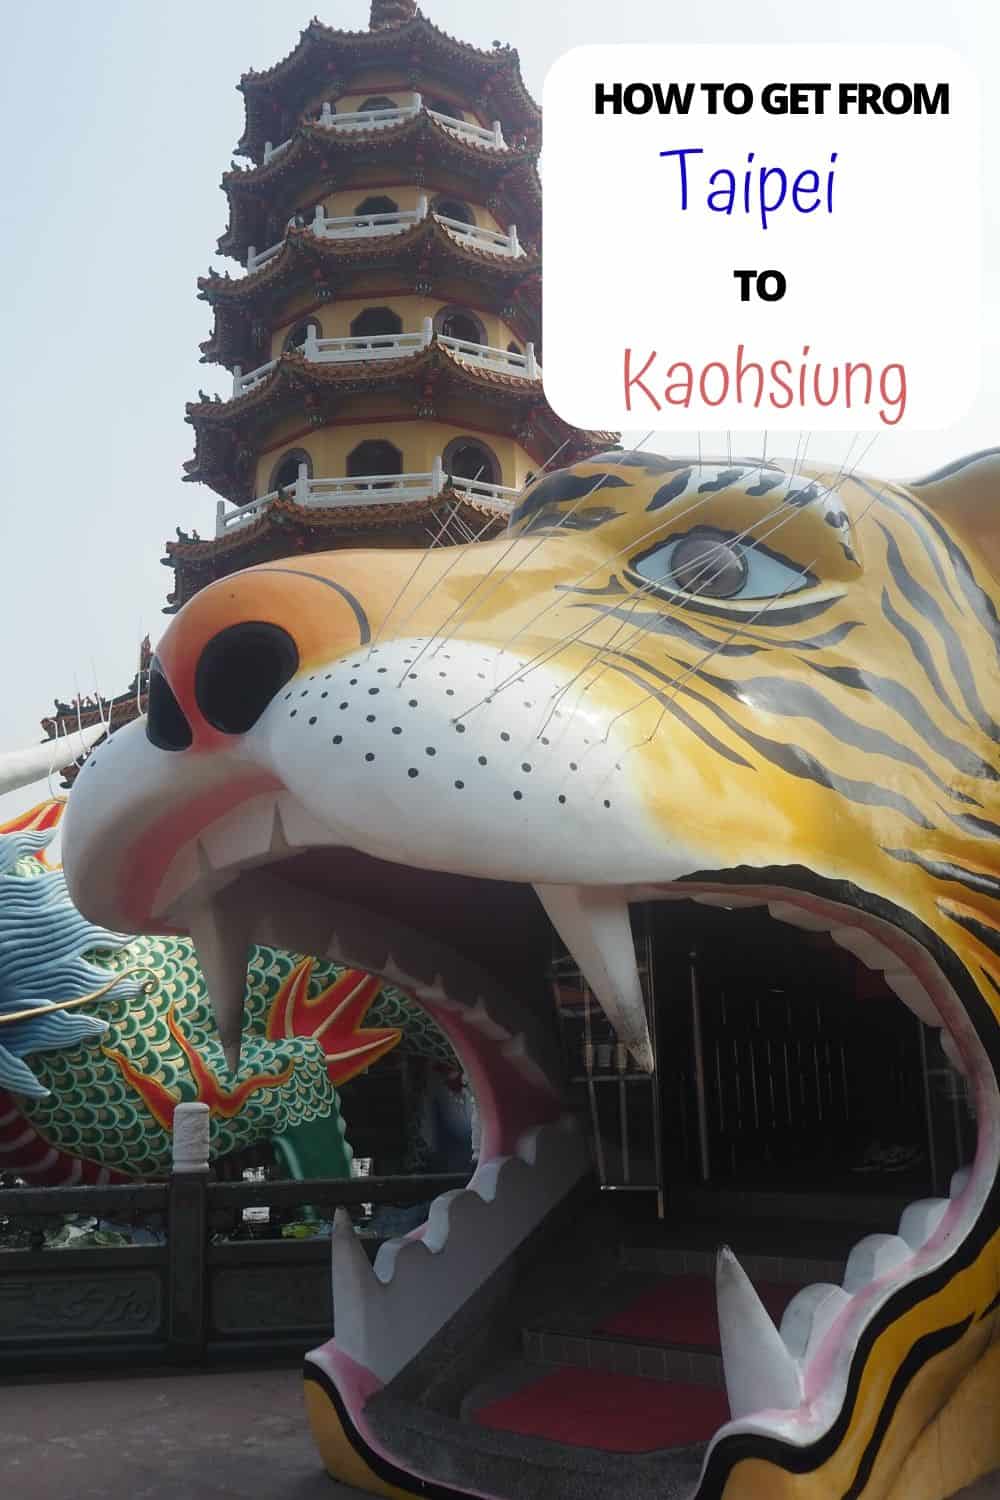 How to Get from Taipei to Kaohsiung